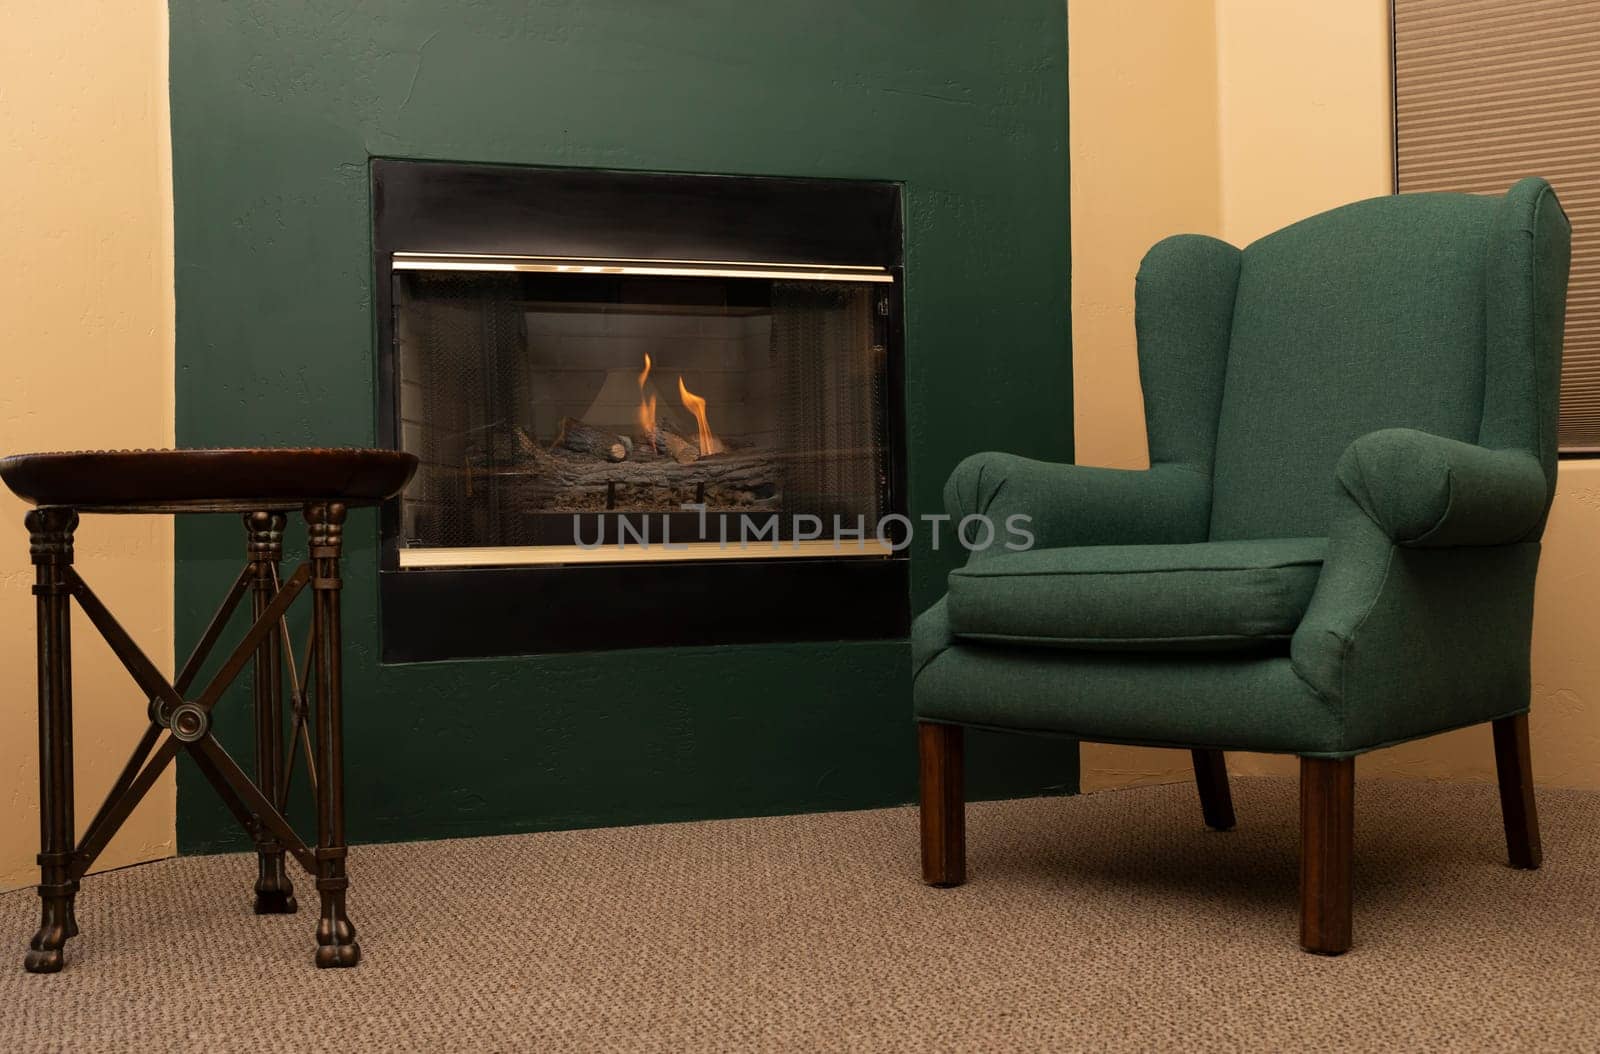 Green Beige Living Room Interior With Gas Electric Fireplace With Wood, Chair And Coffee Table, Carpet On Floor. Horizontal Plane. Winter Mood, Comfort At Home. Recreation In Cabins On Mountains by netatsi